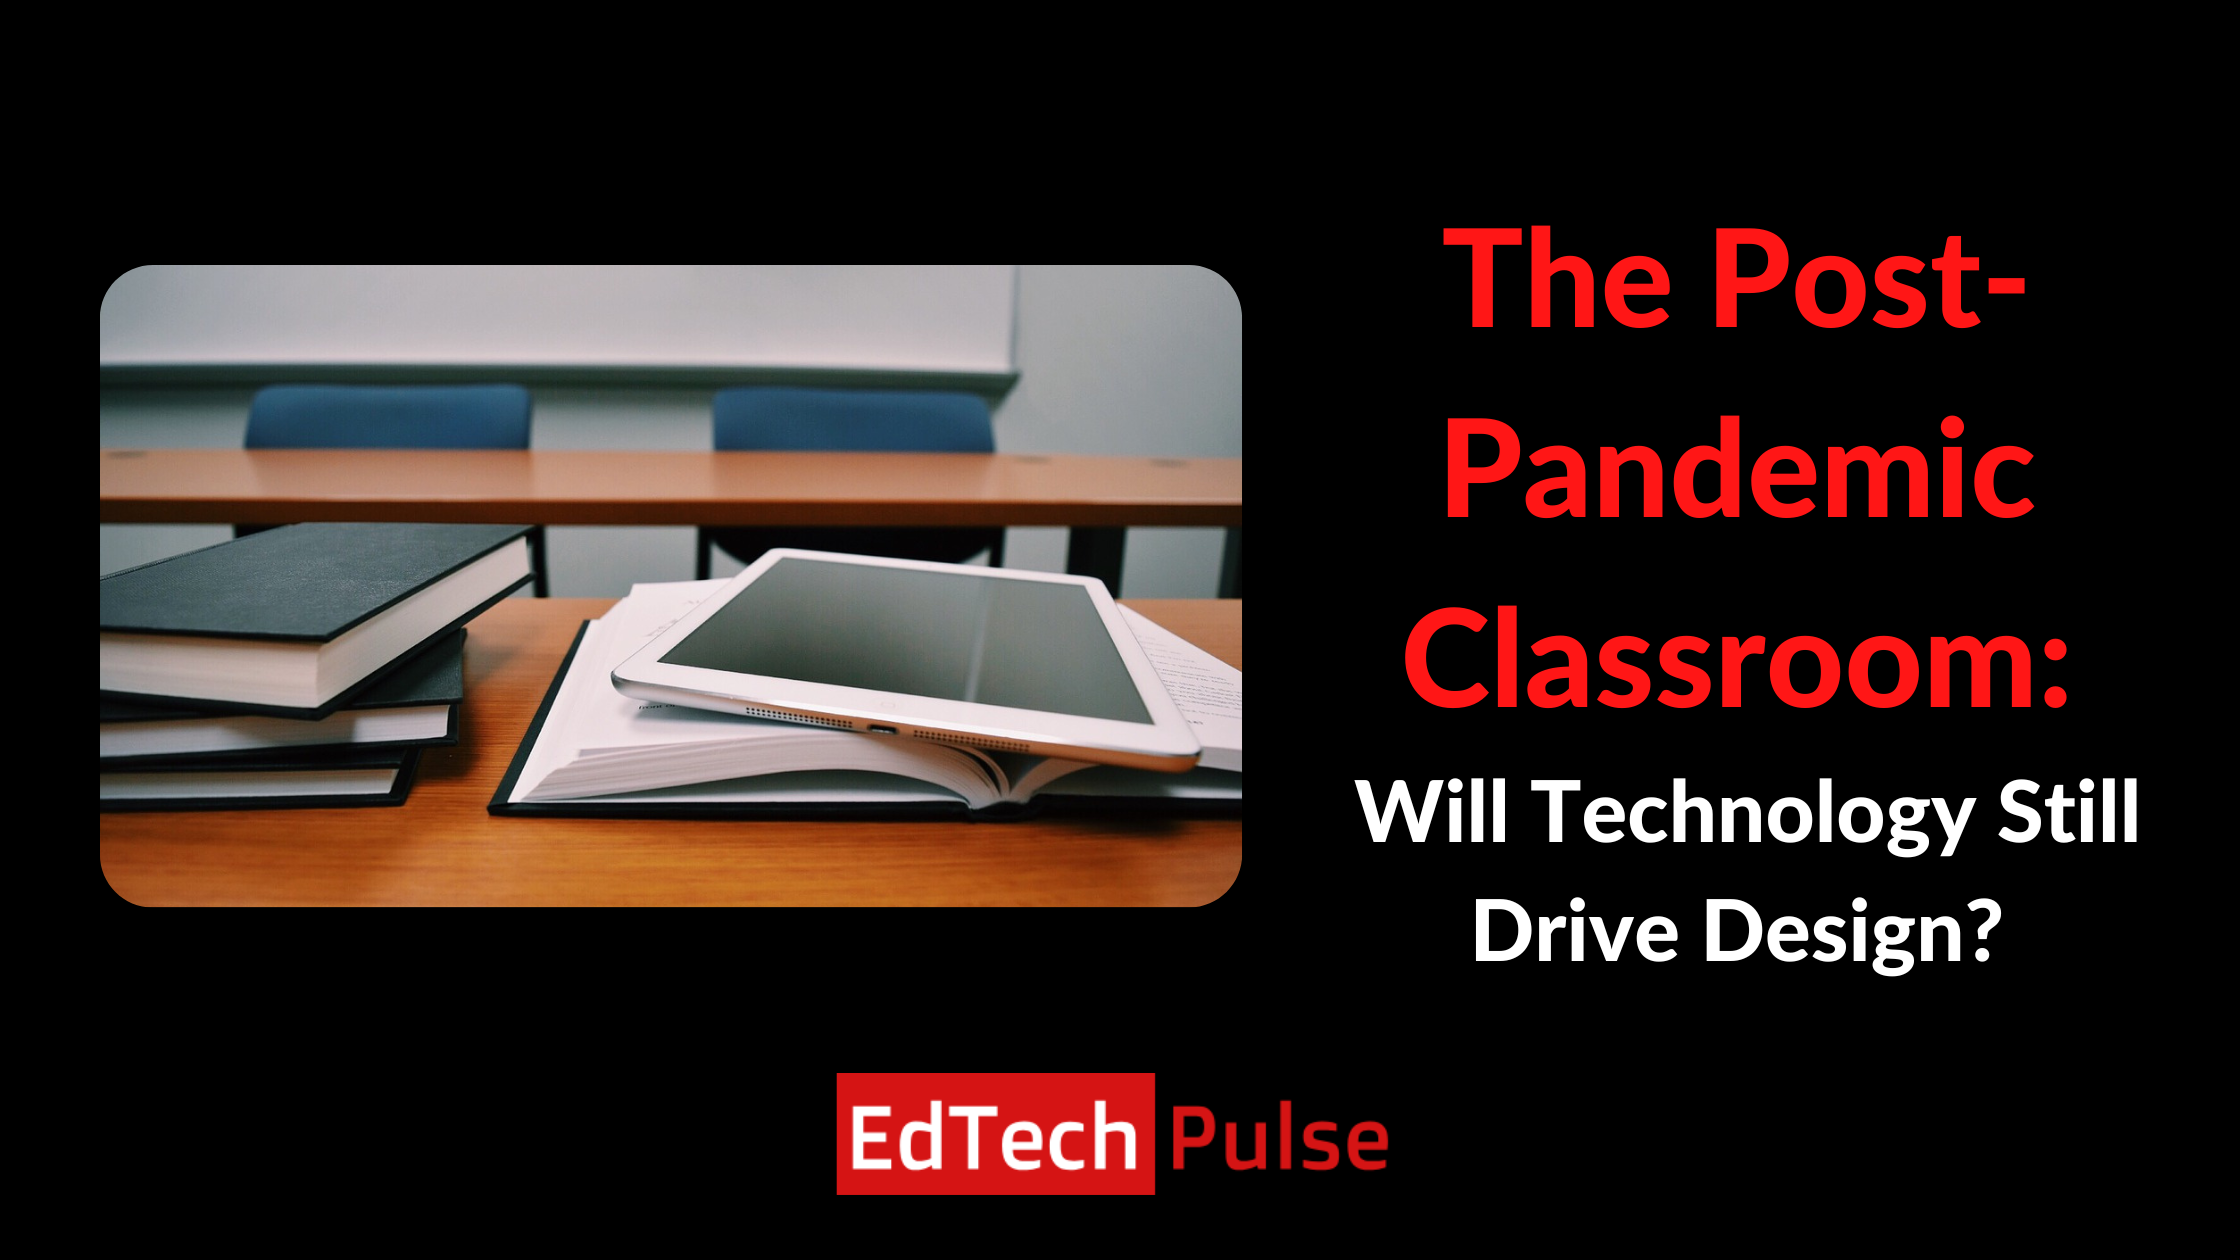 The Post-Pandemic Classroom: Will Technology Still Drive Design?